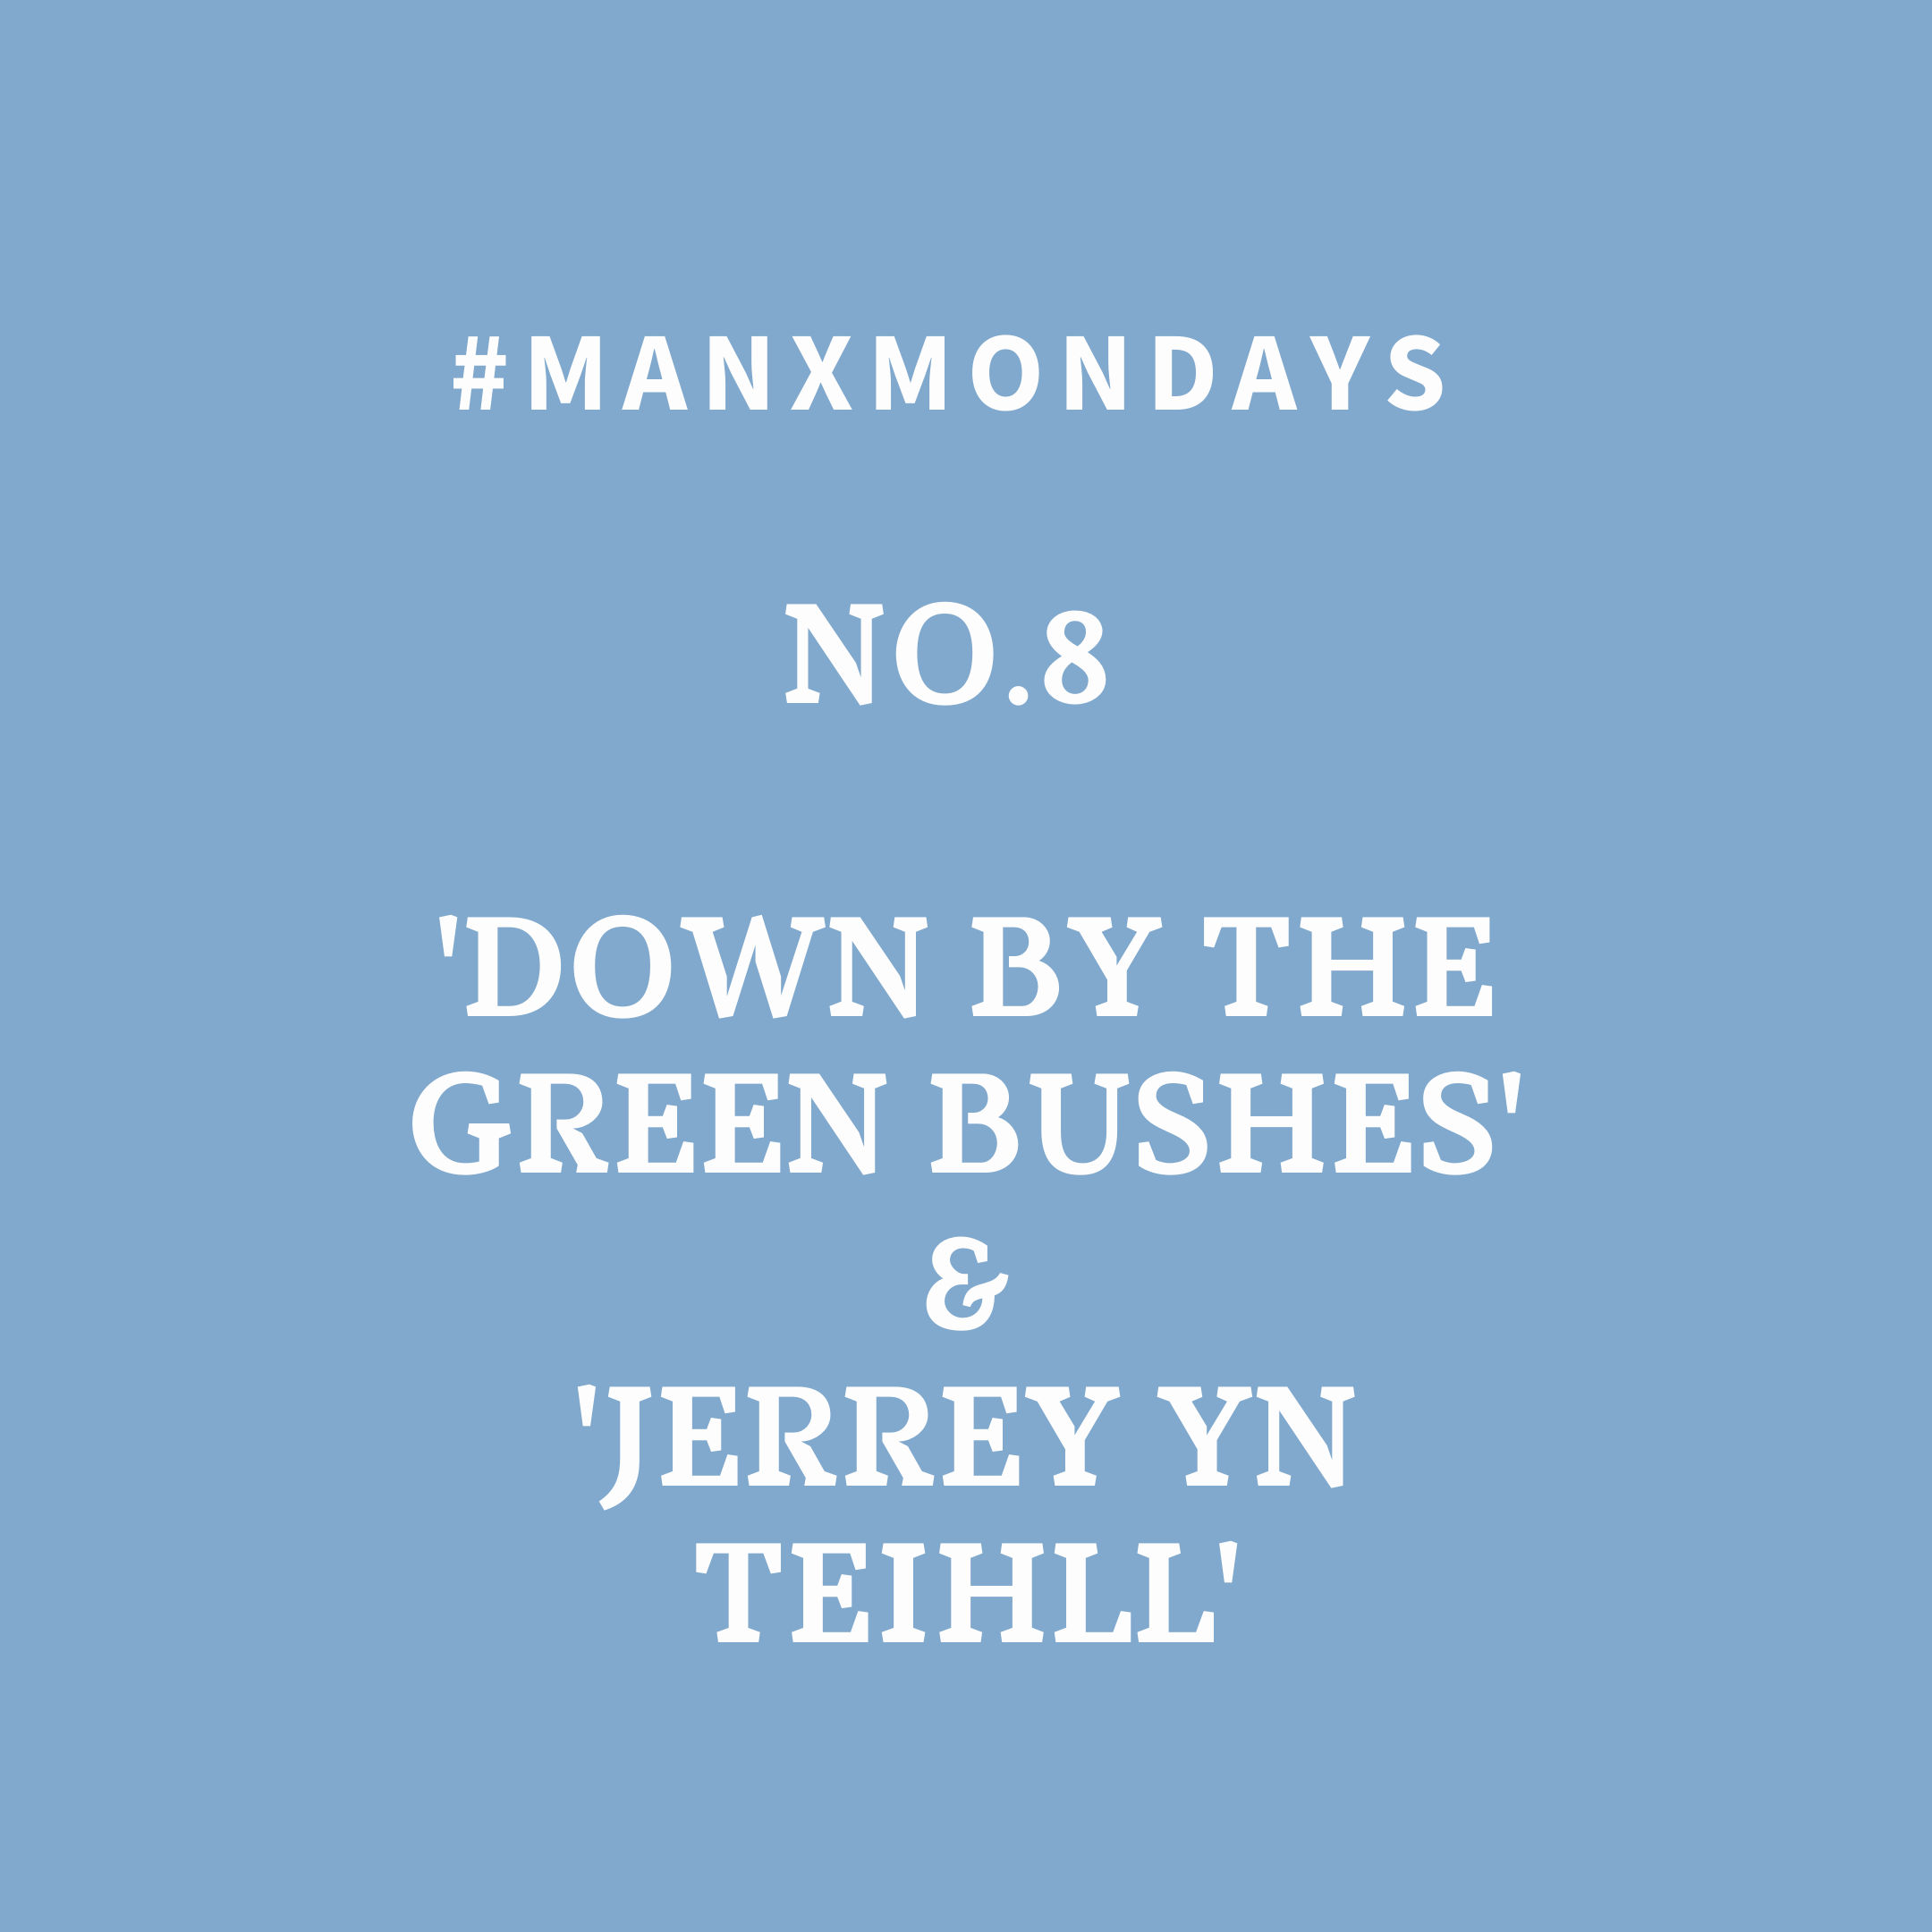 Image with white text over a light blue background. Text reads - #ManxMondays No. 8 'Down By The Green Bushes' & ‘Jerrey yn teihll’